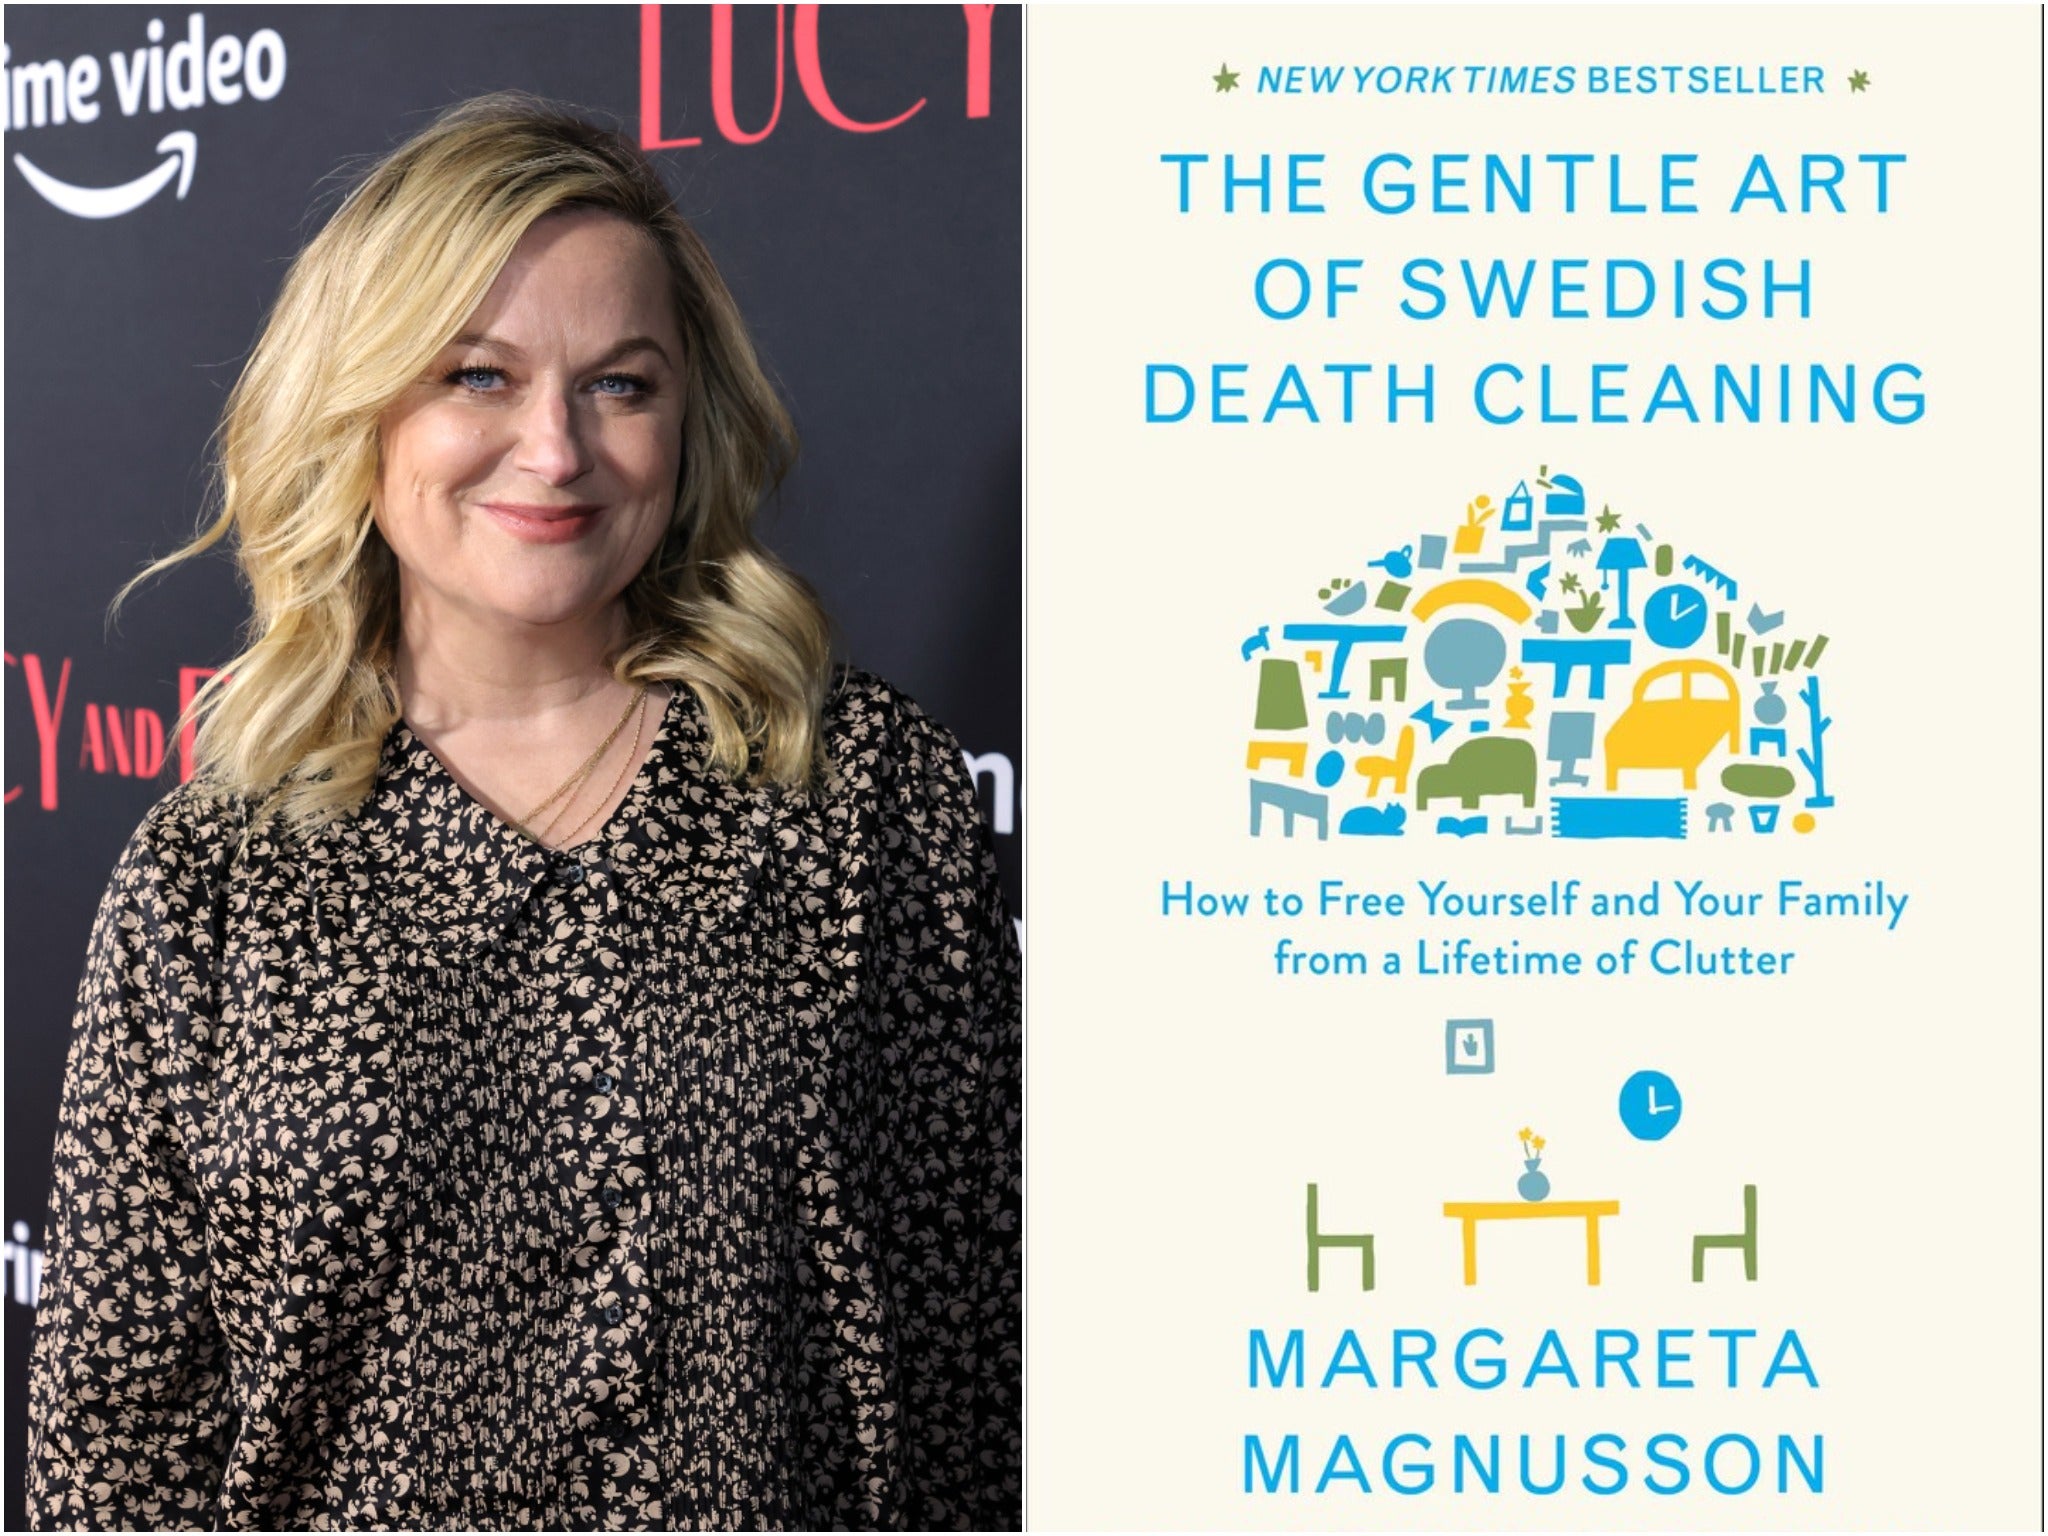 Amy Poehler will narrate The Gentle Art of Swedish Death Cleaning